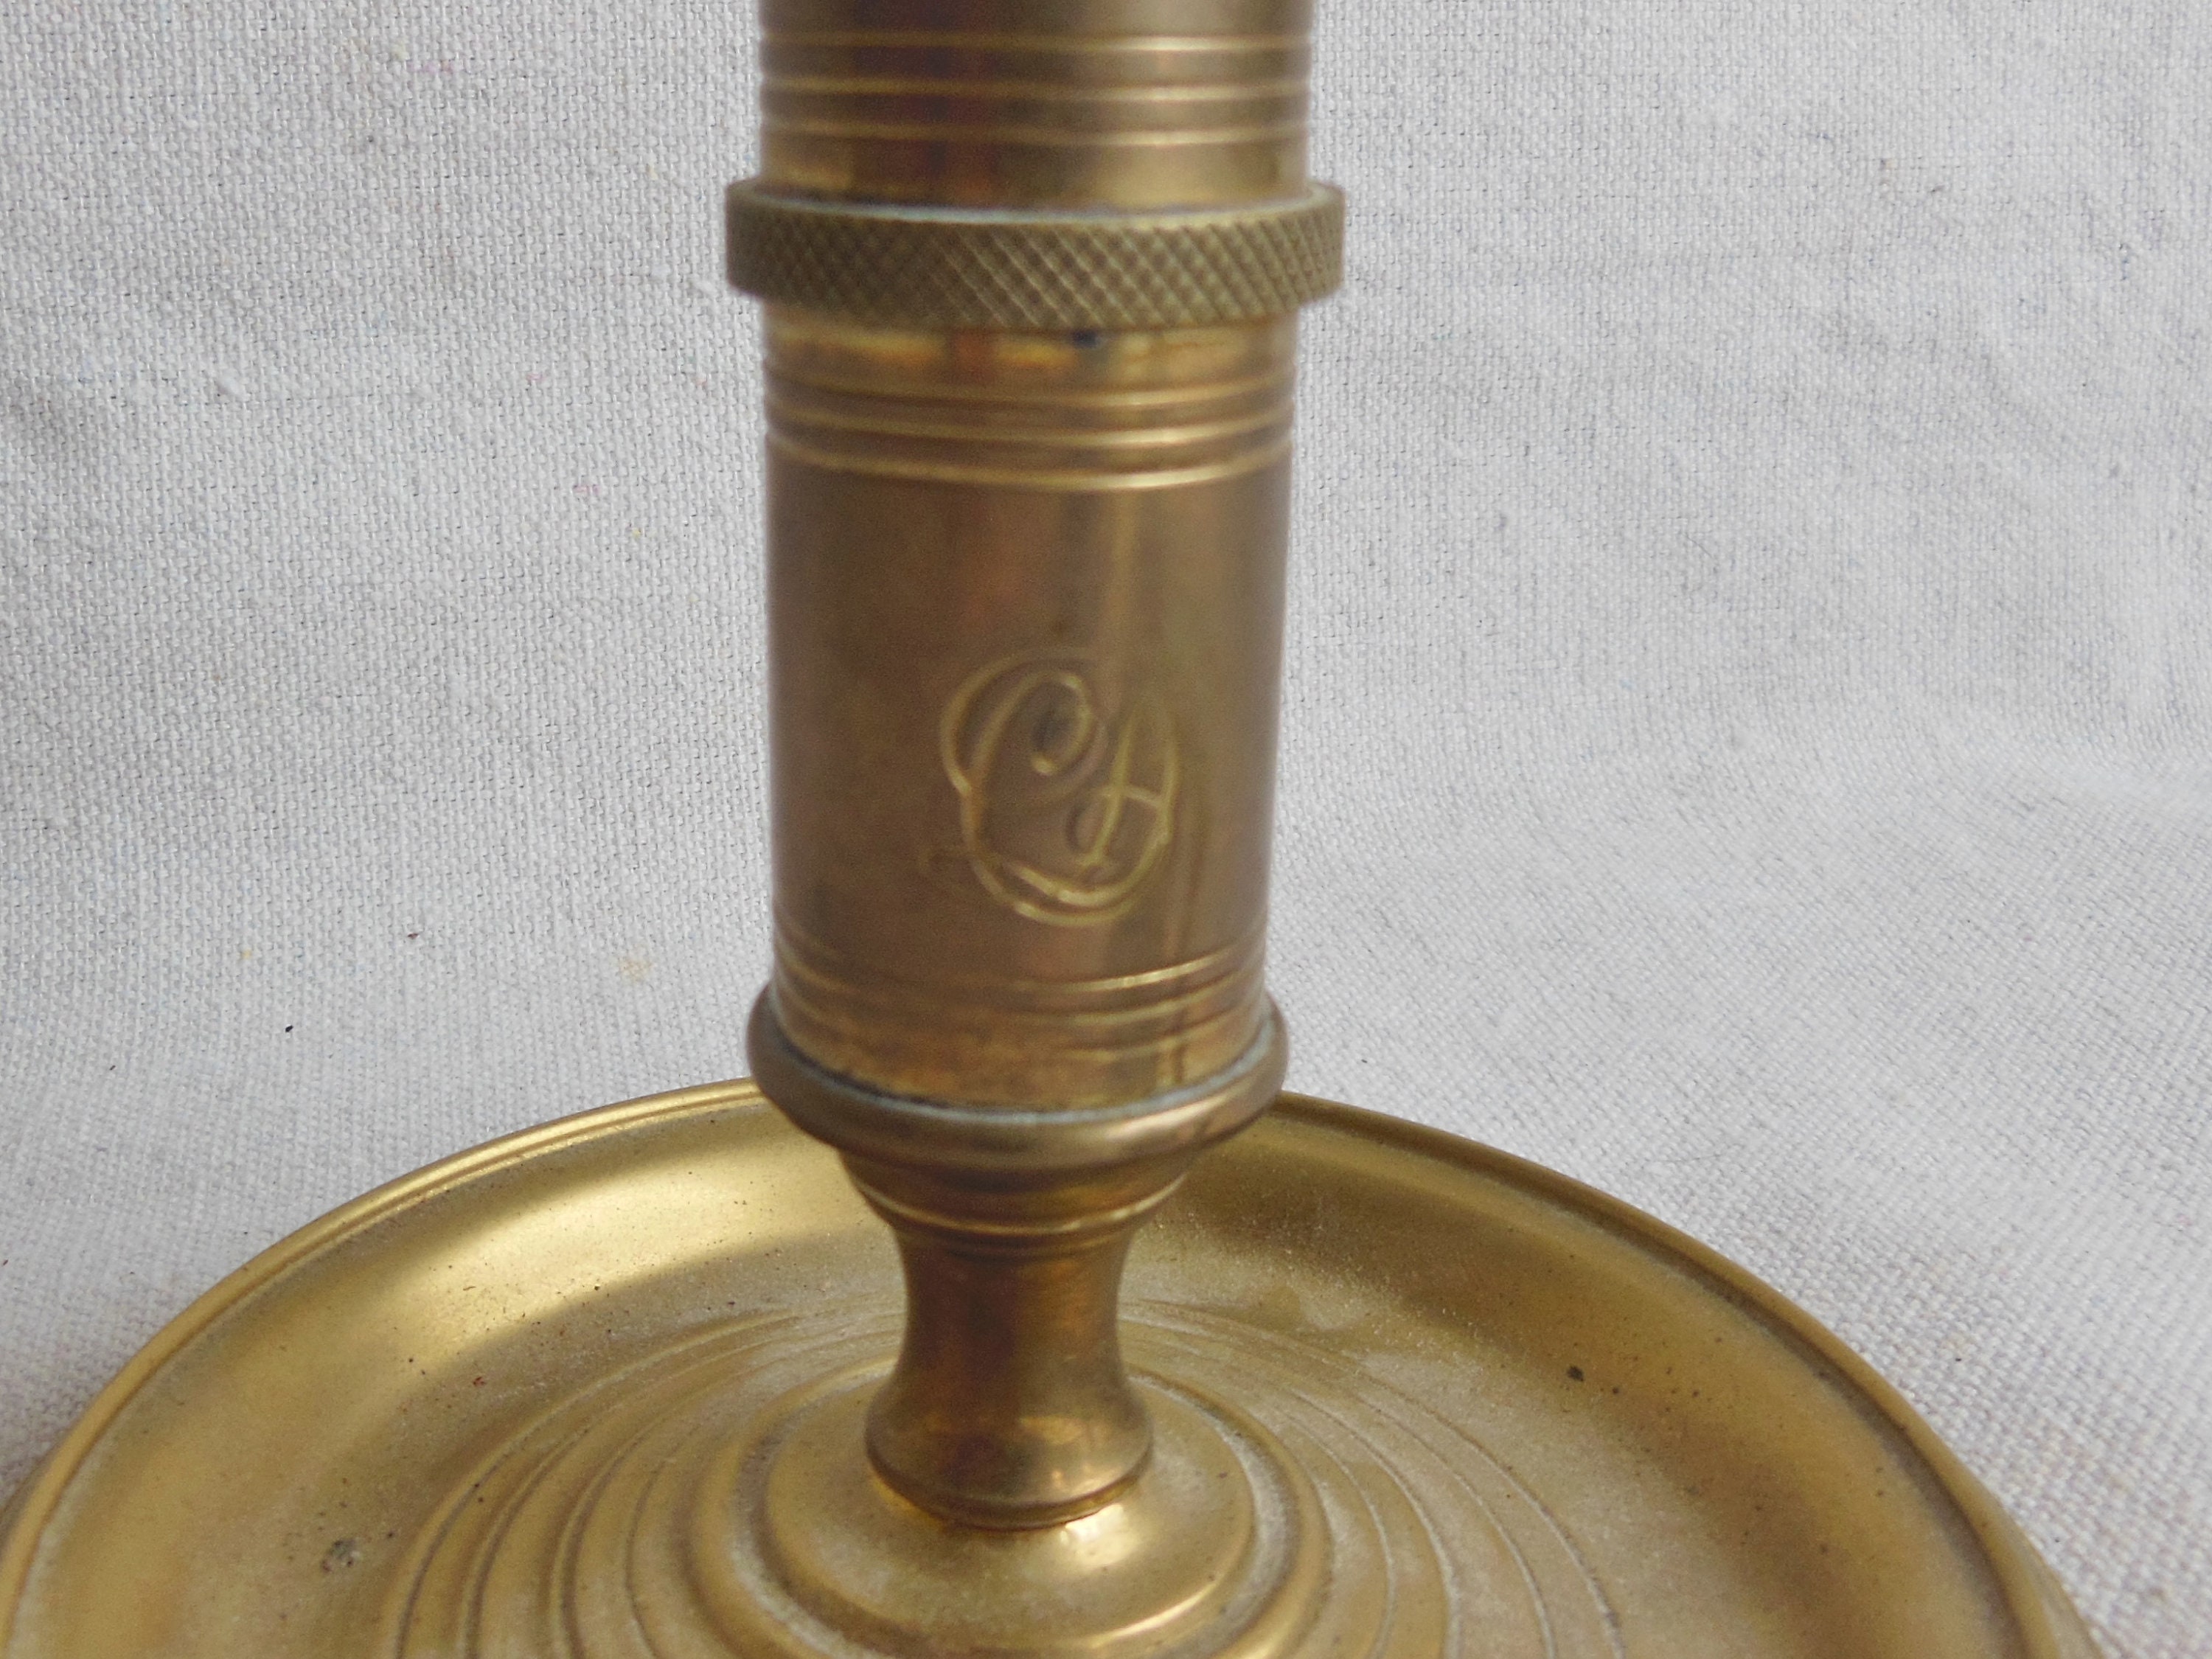 Vintage Department 56 Brass Candleholder Snuffer Monogram C or G Solid Brass  Candle Holder Charles Dickens Chamber Style Candlestick Holder 